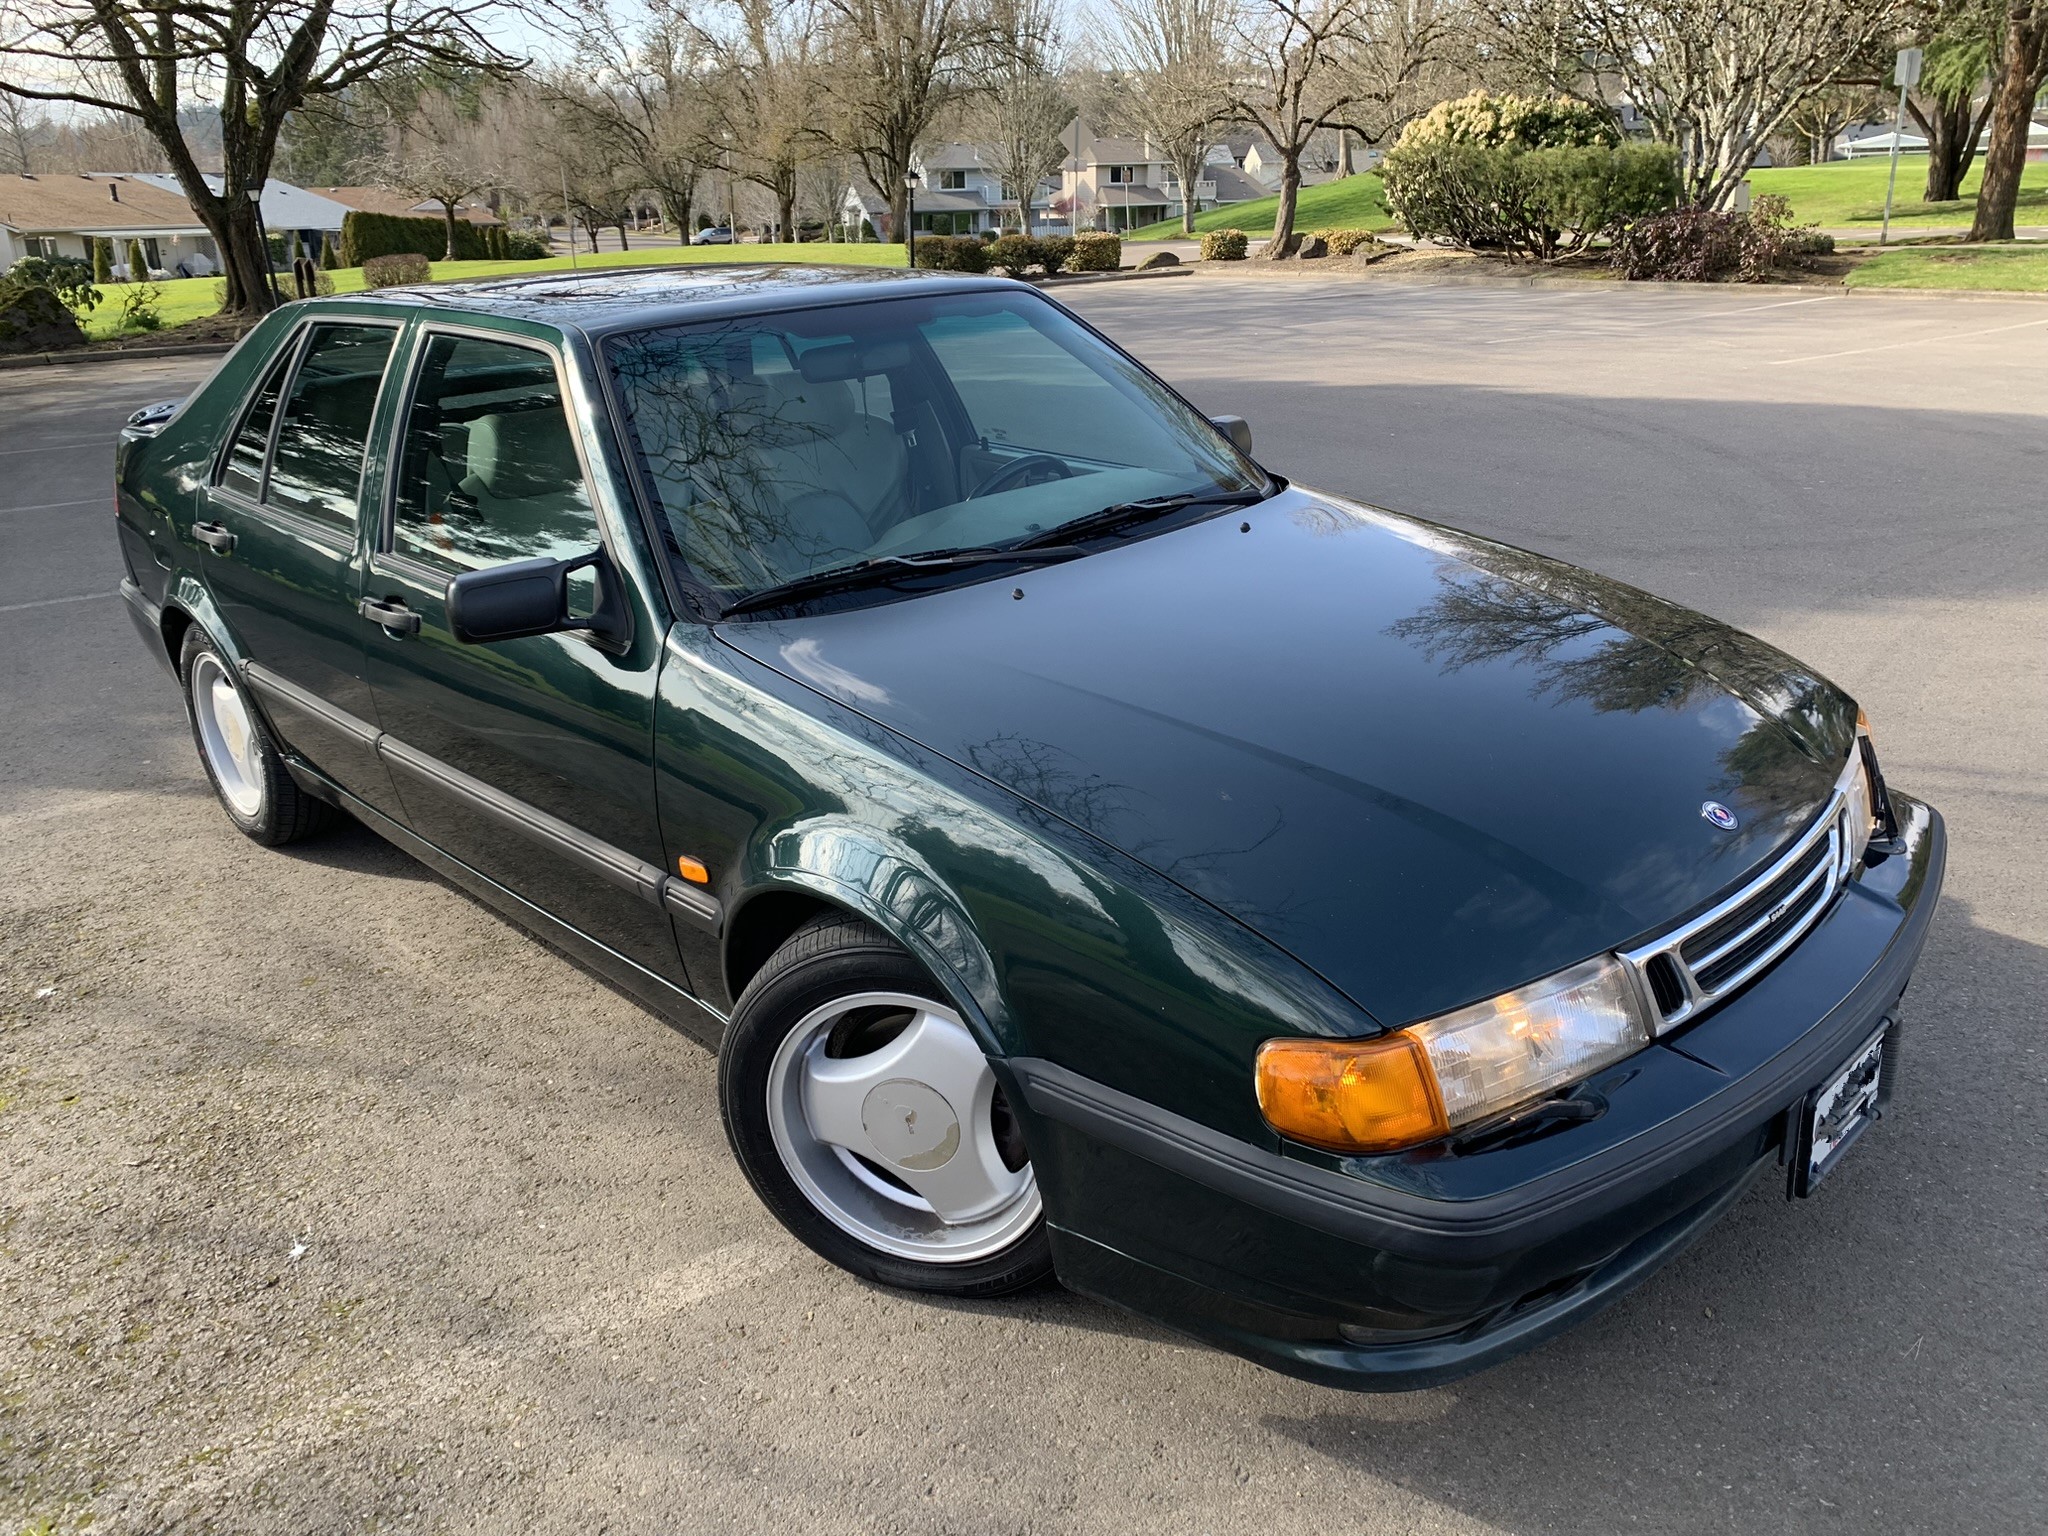 Used Saab 9000 for Sale Right Now - Autotrader